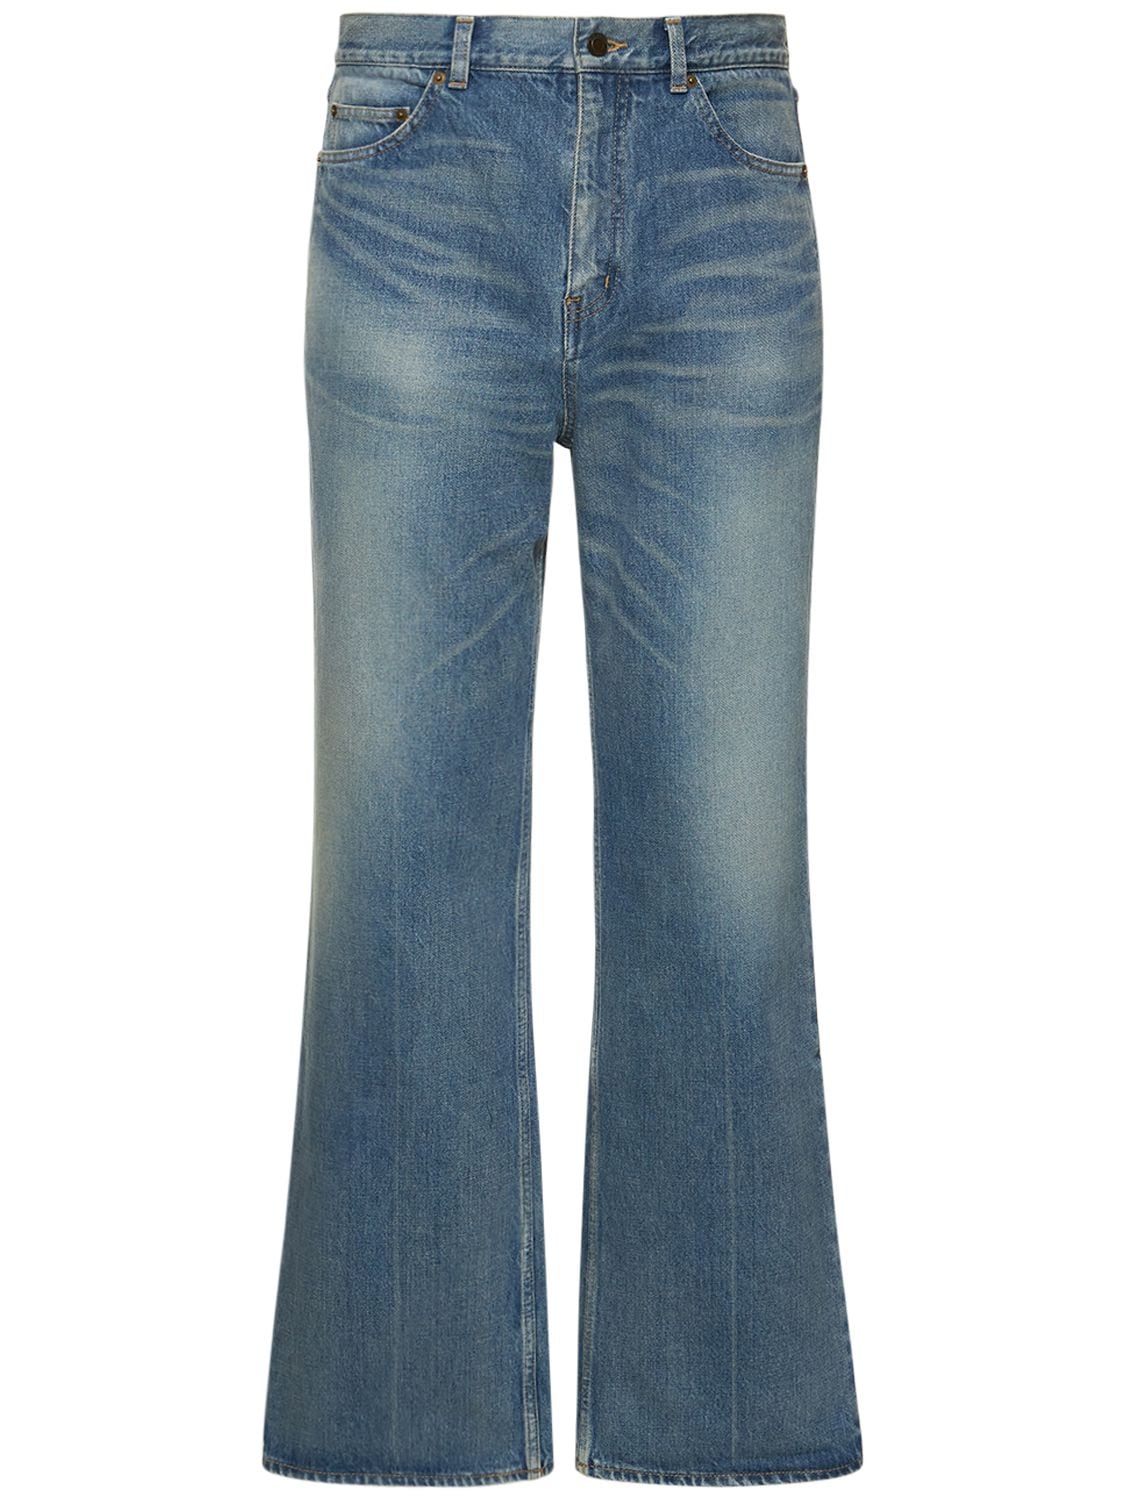 70’s Flared Cotton Jeans – MEN > CLOTHING > JEANS